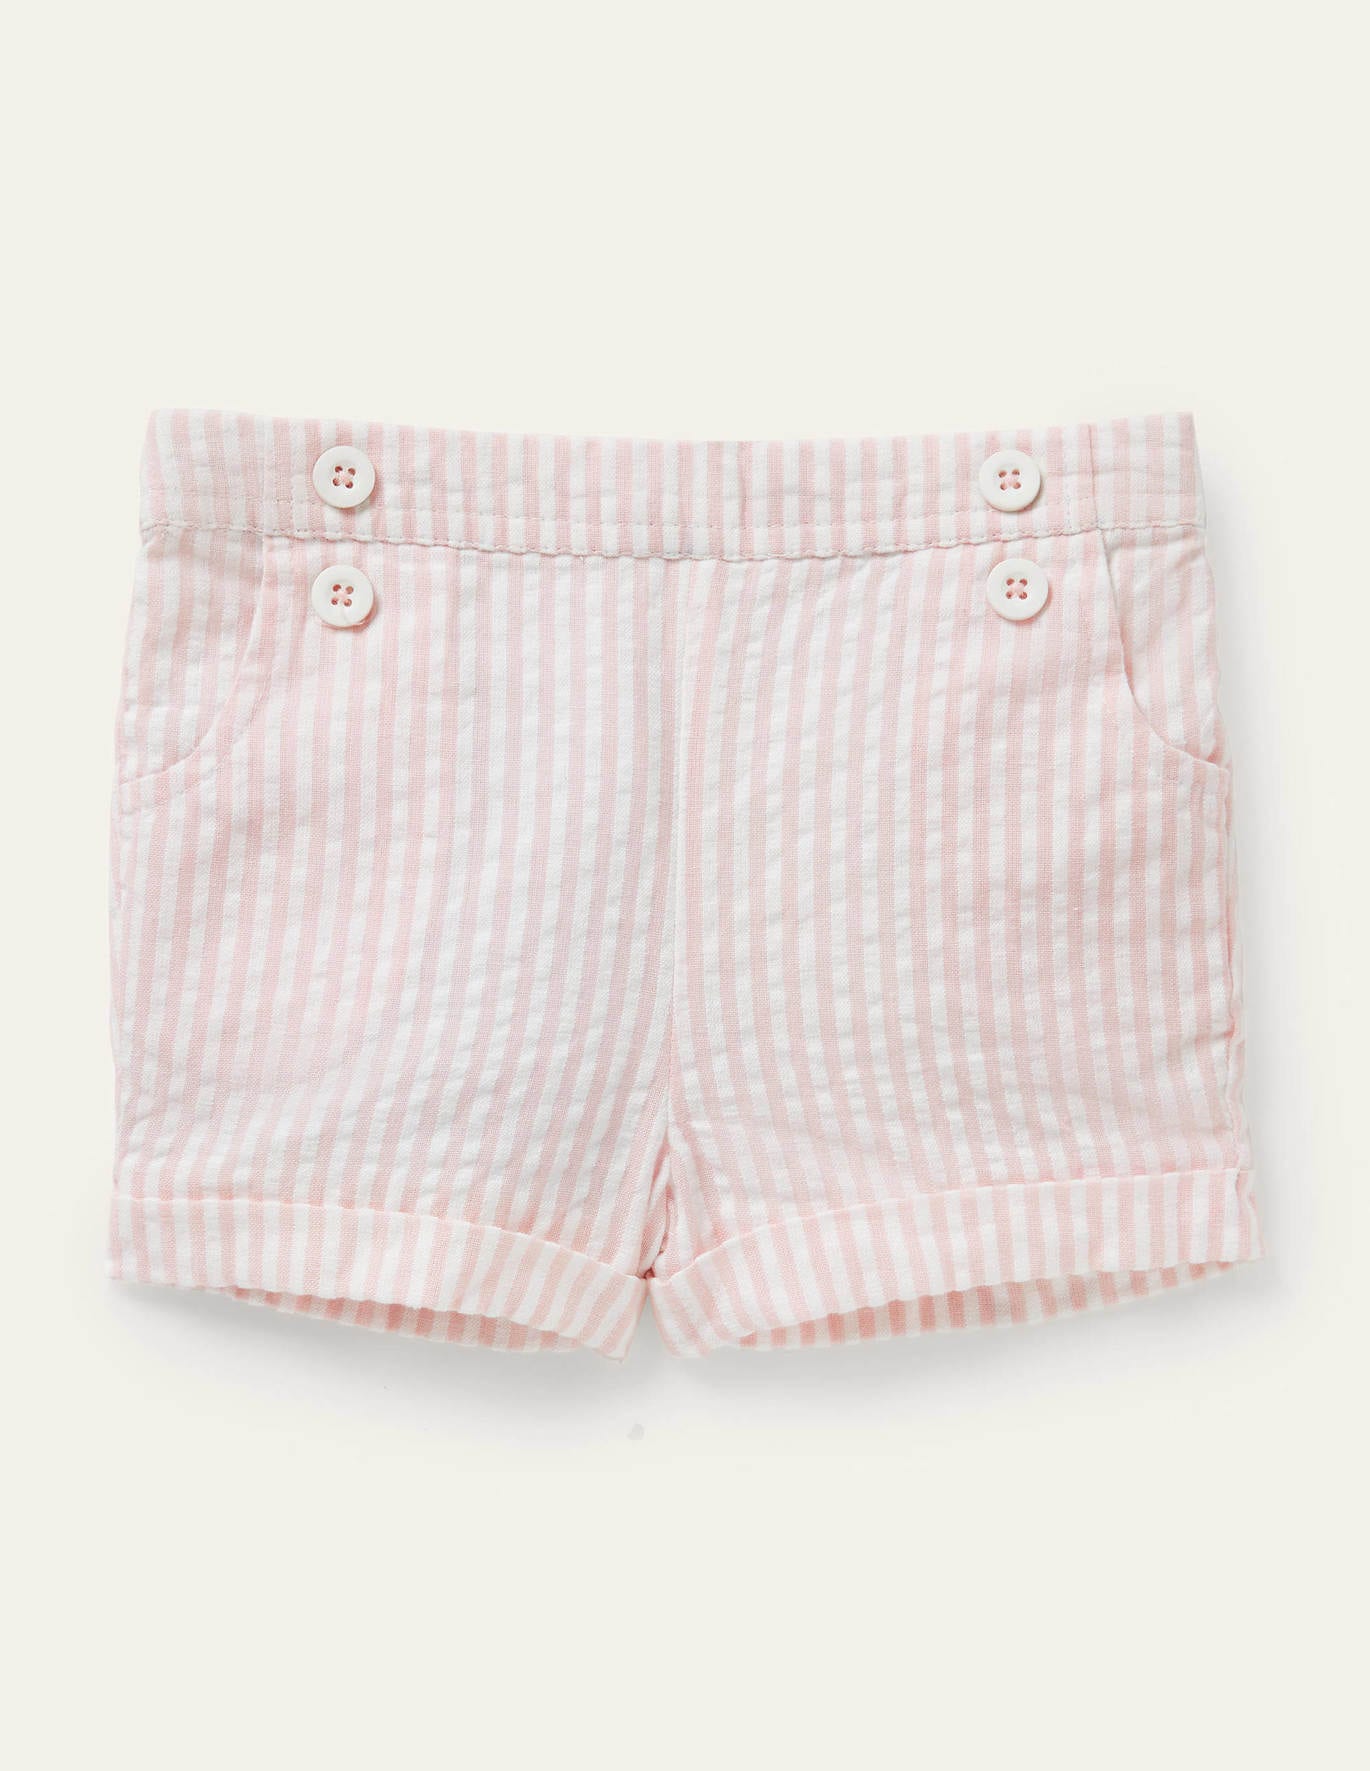 Boden Woven Bloomers - Ivory/Pink Lemonade Ticking